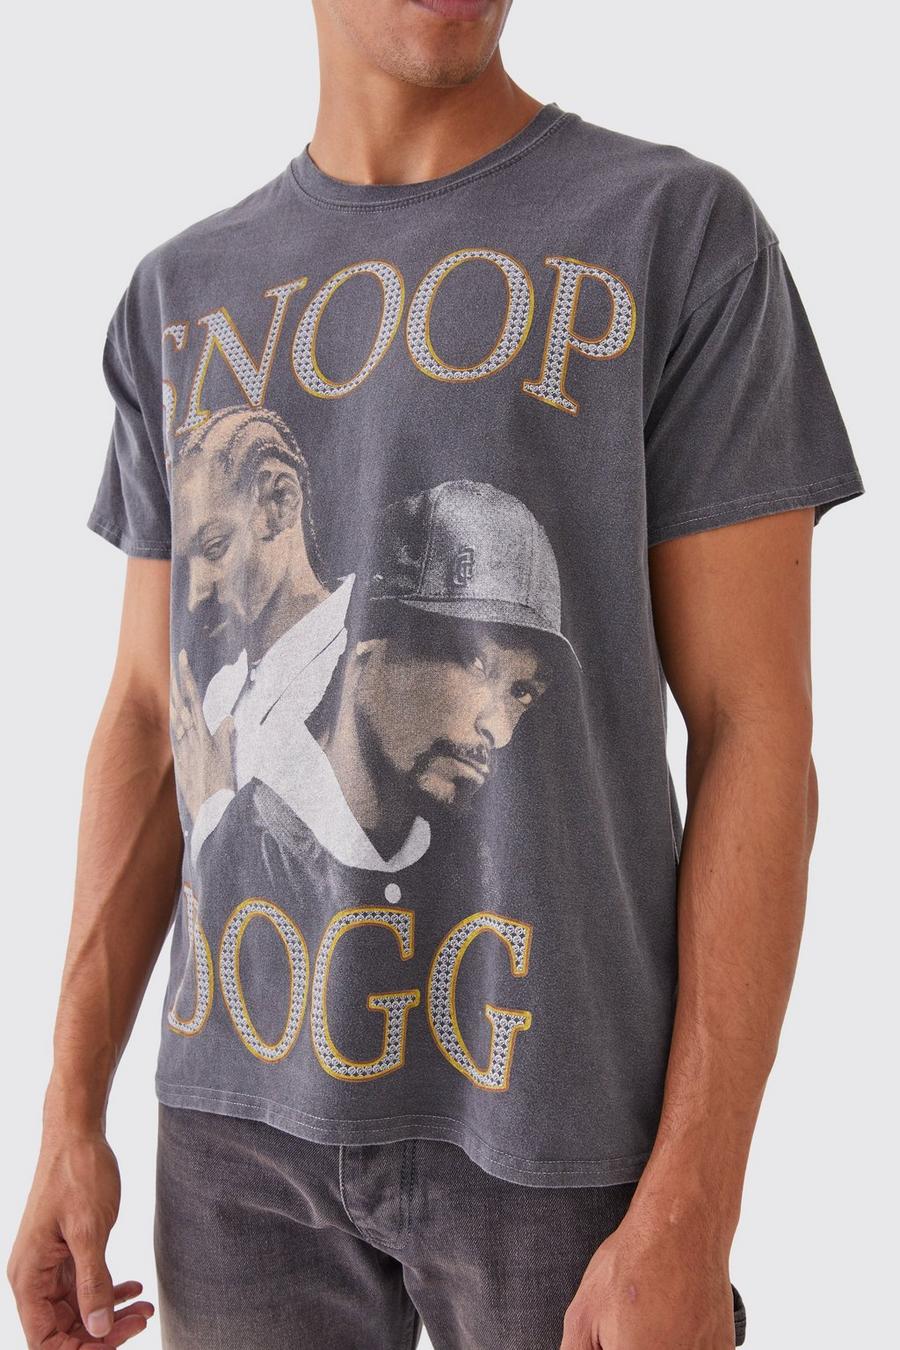 T-shirt oversize sovratinta ufficiale Snoop Dogg, Charcoal